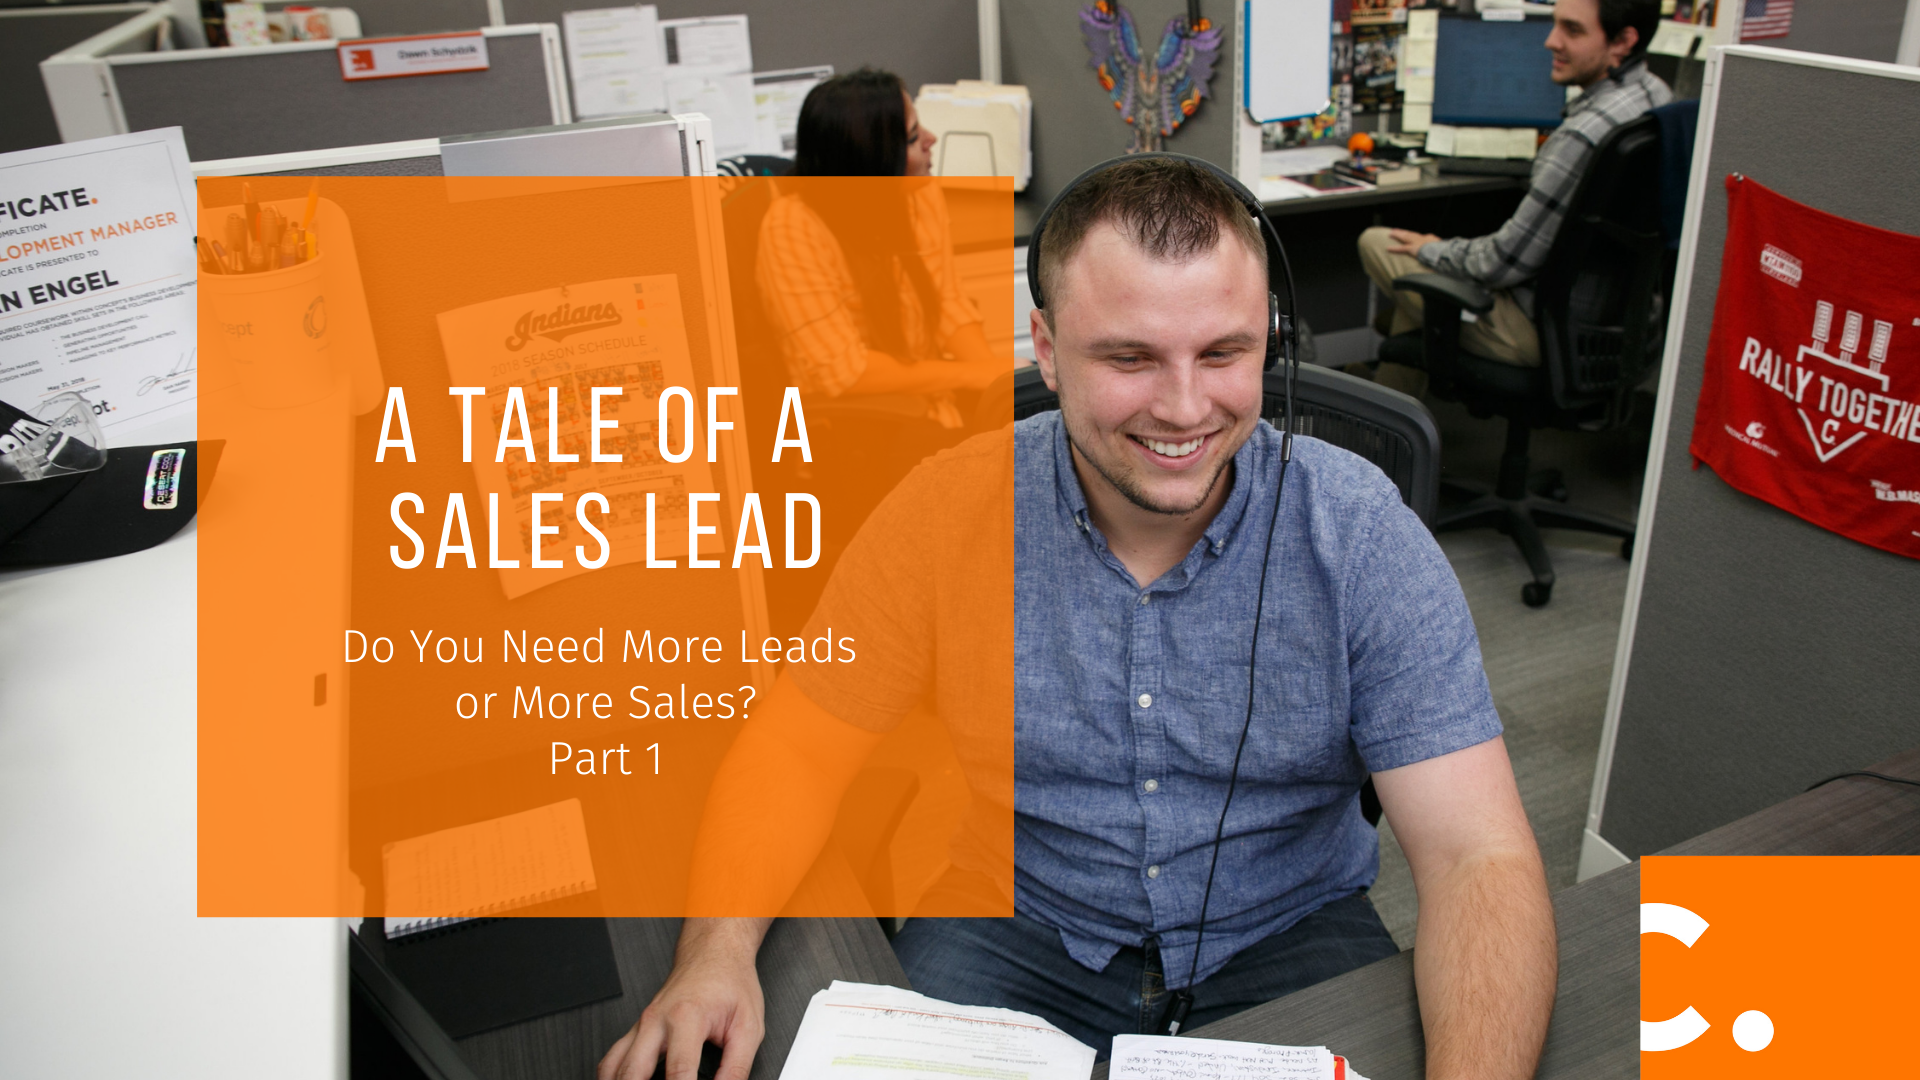 When figuring out if your company needs more sales leads or more sales, it’s important to start with the basics of what a sales lead is.